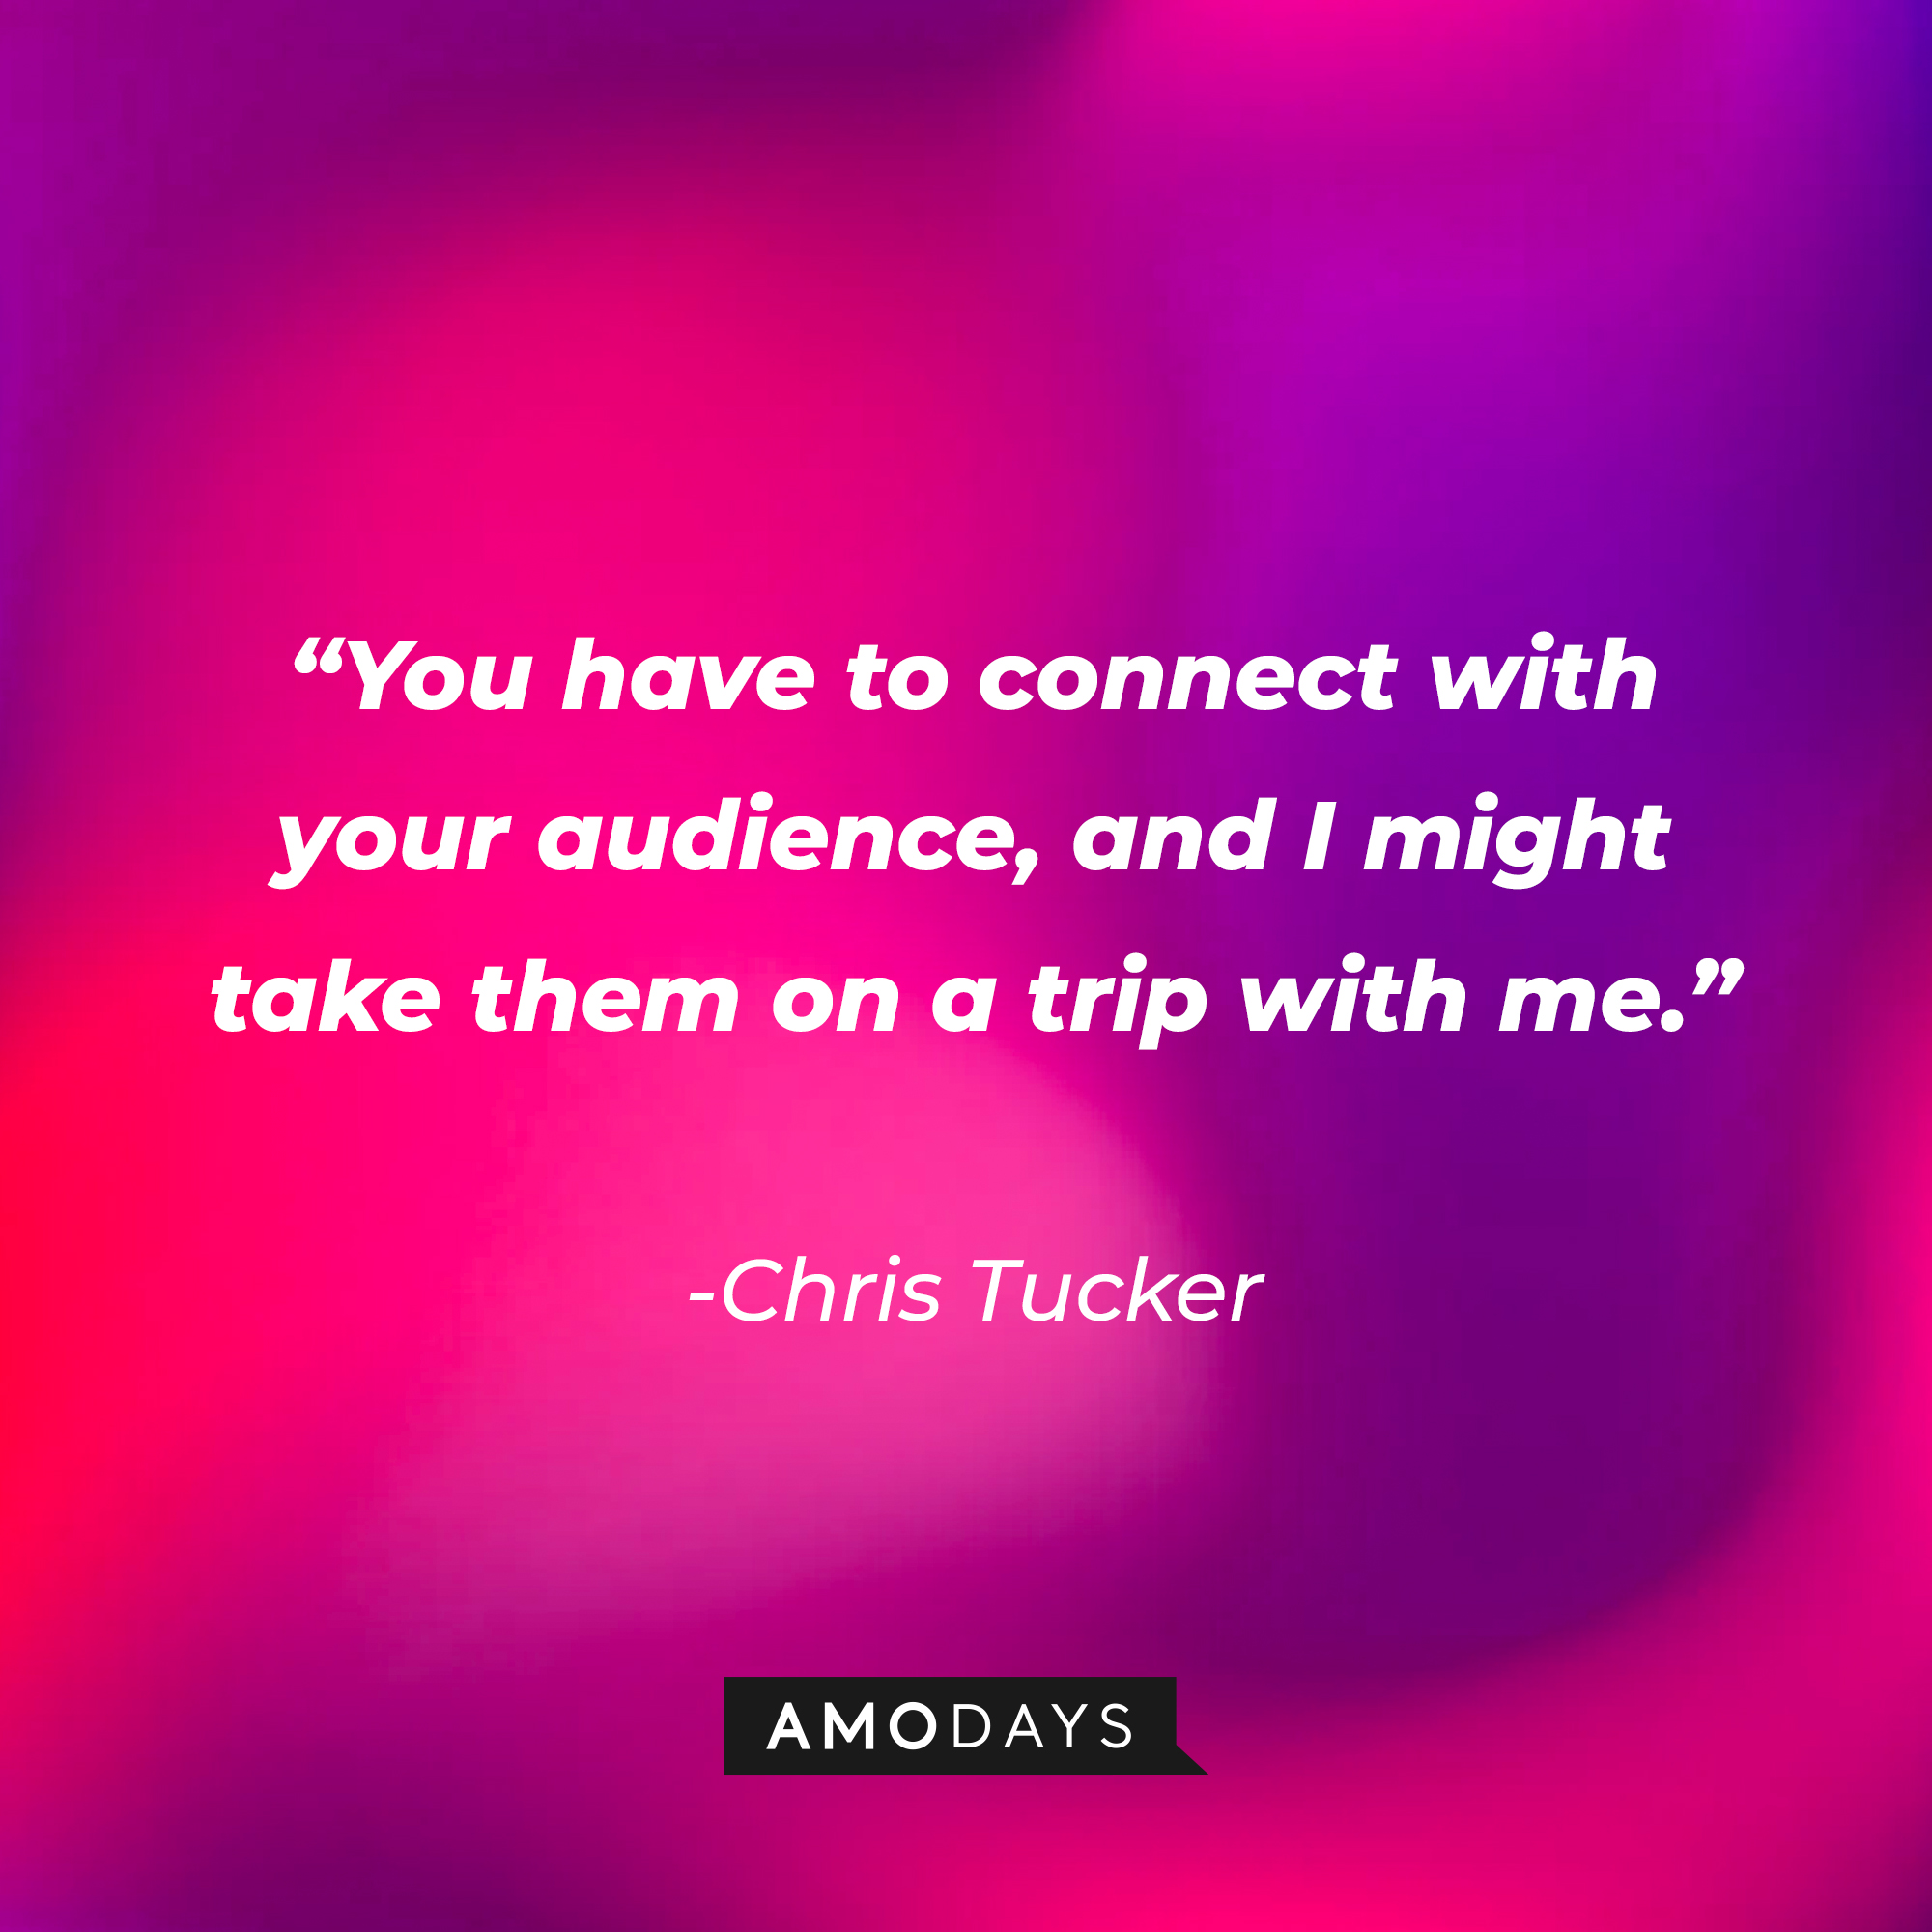 Chris Tucker’s quote: “You have to connect with your audience, and I might take them on a trip with me.”┃Source: AmoDays